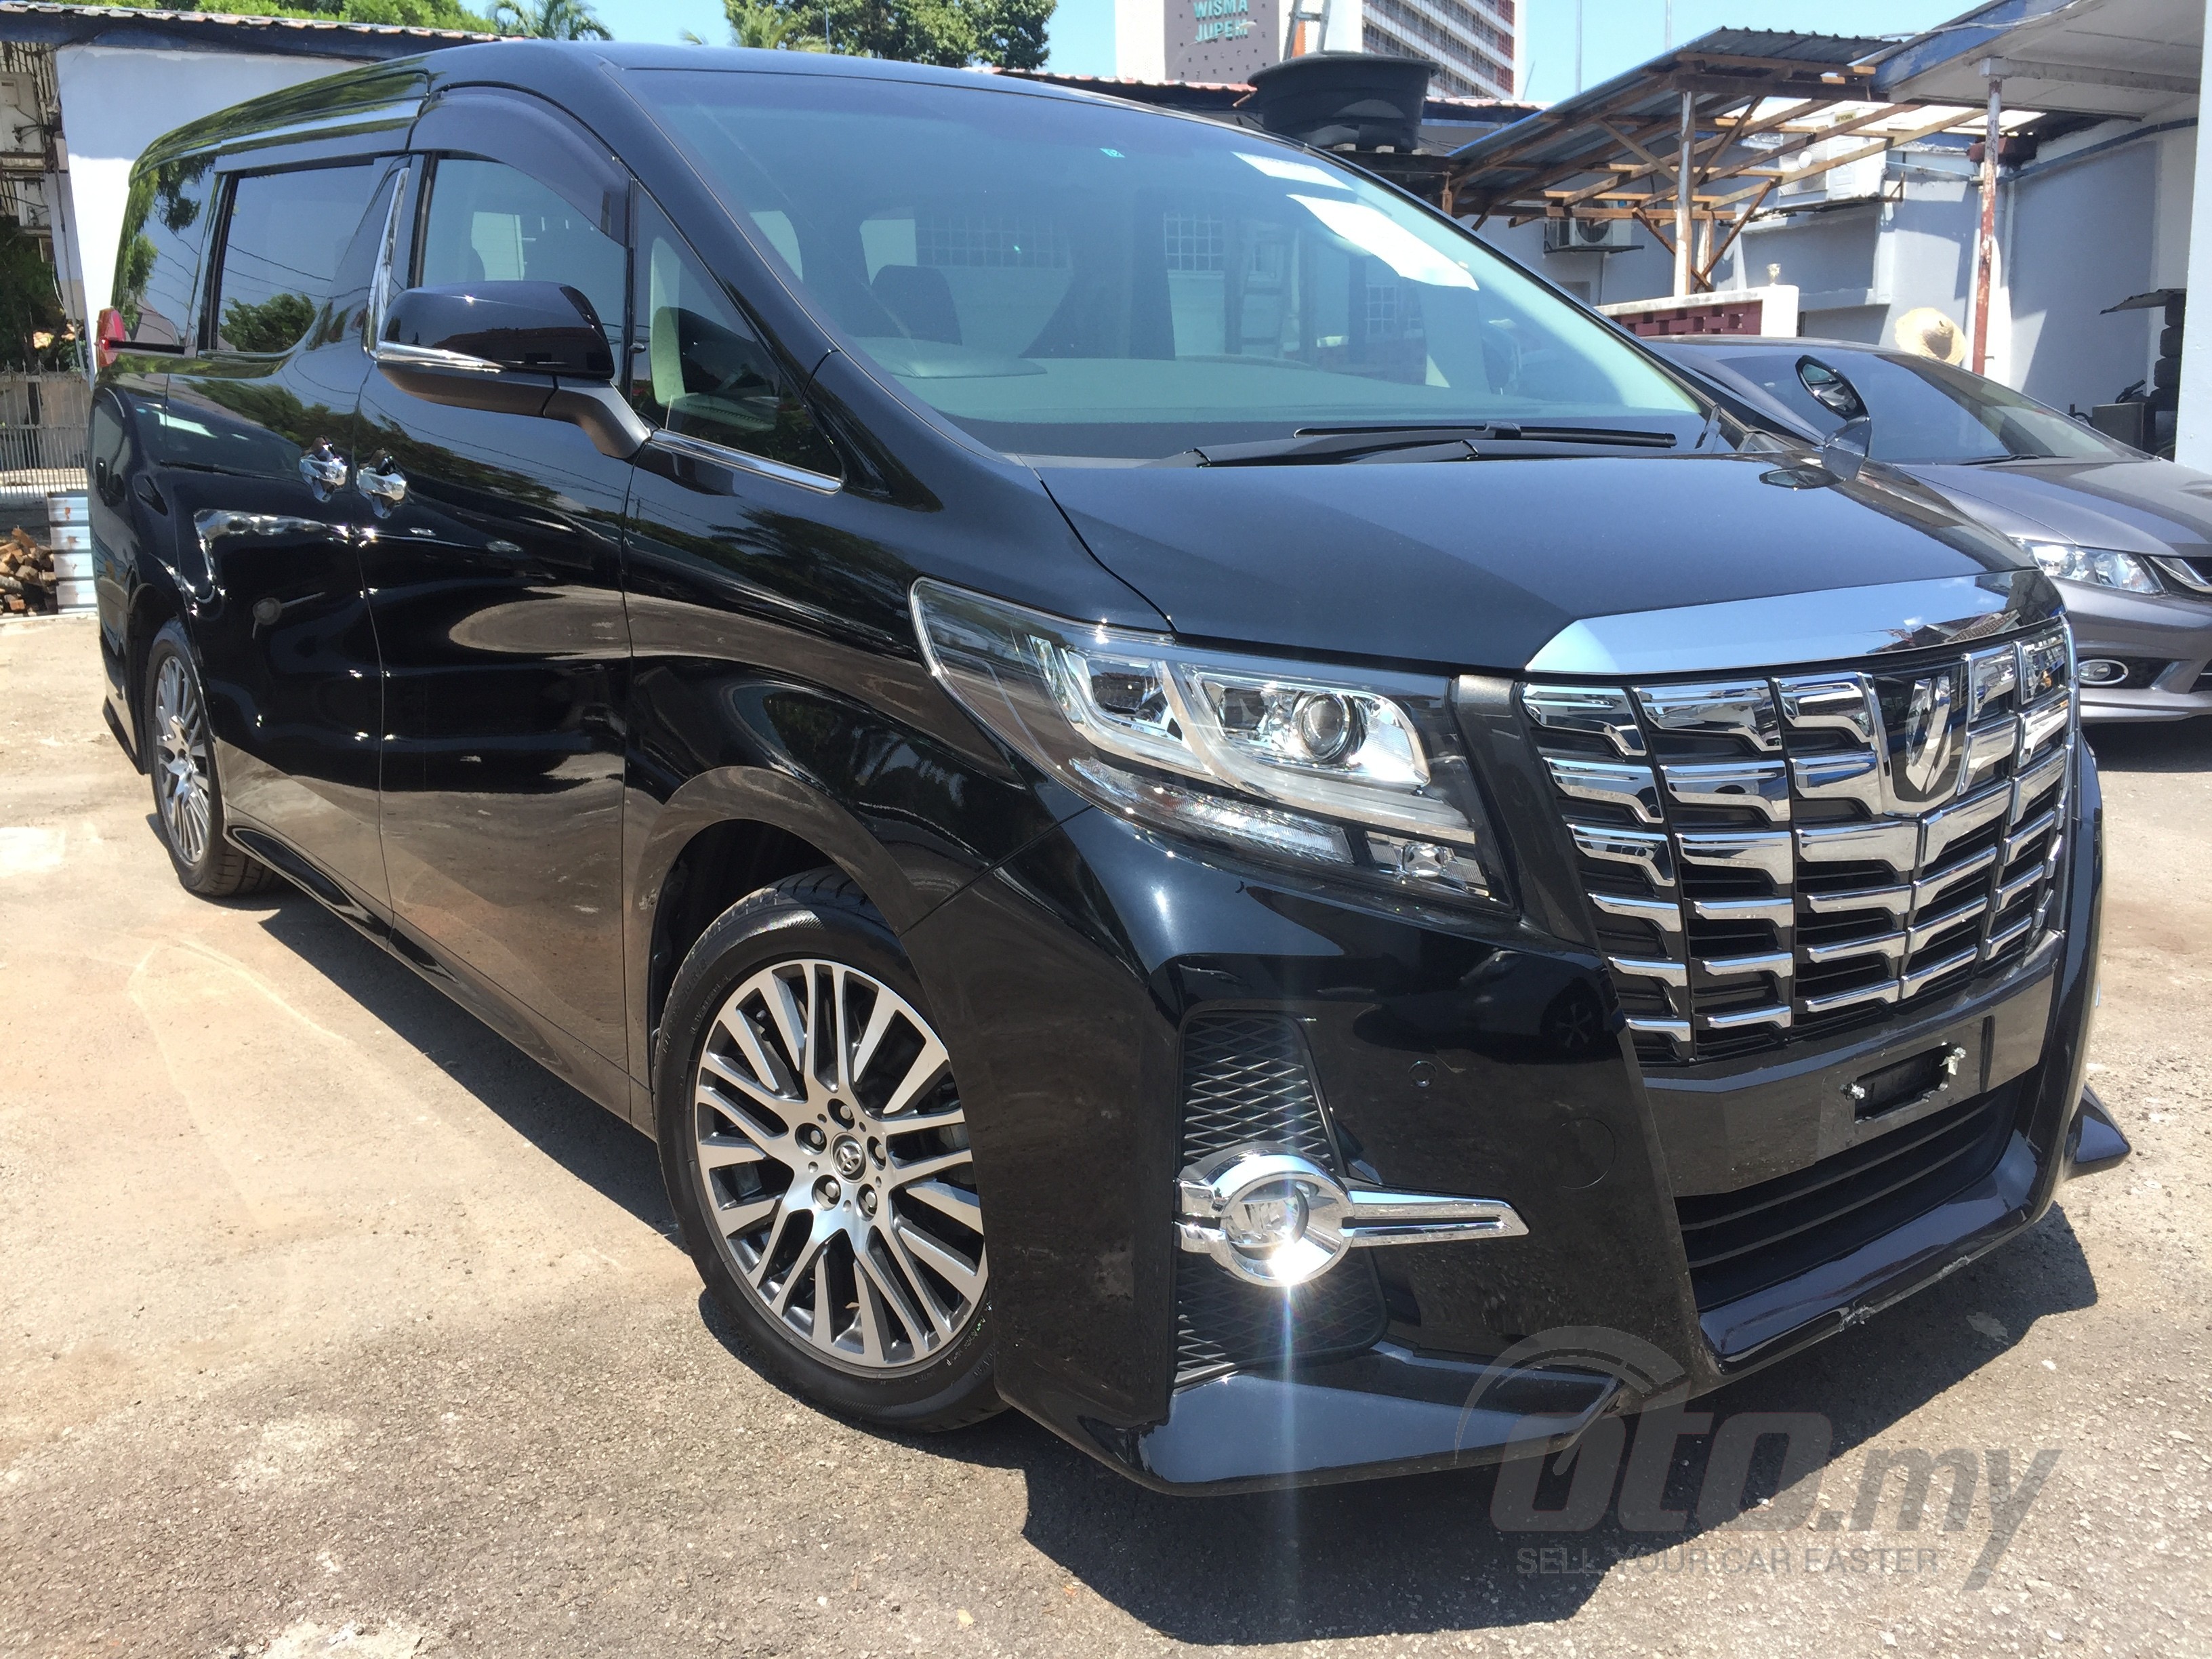 Toyota Alphard best specifications